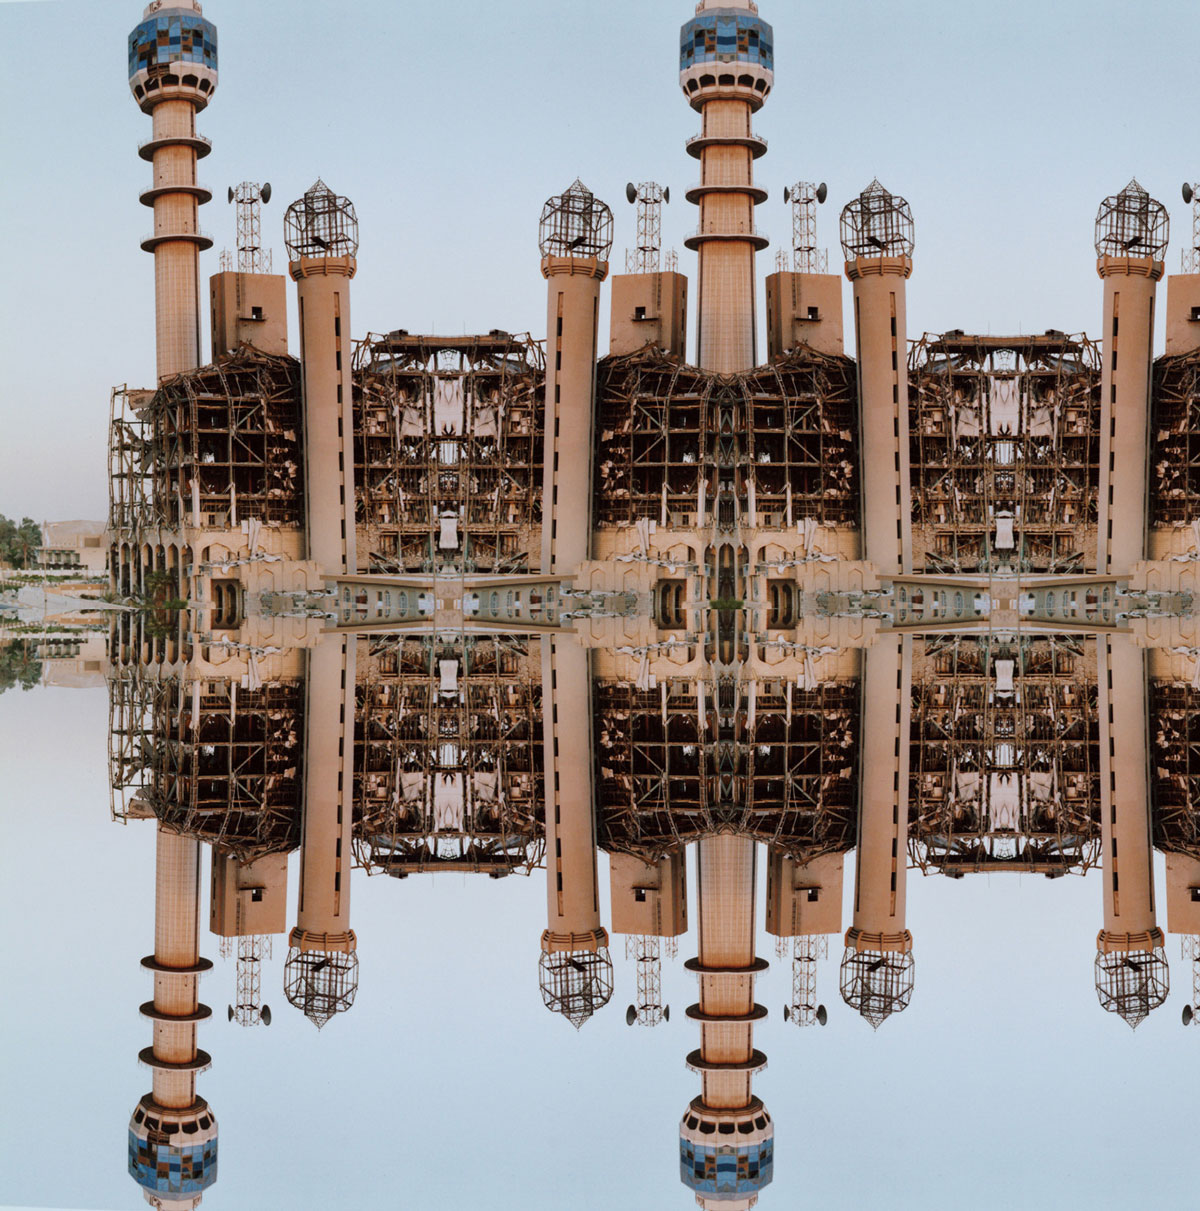 A 2004 artwork by Caitlin Masley titled “two towers,” depicting a photograph of buildings digitally rendered to create symmetrical geometric patterns.